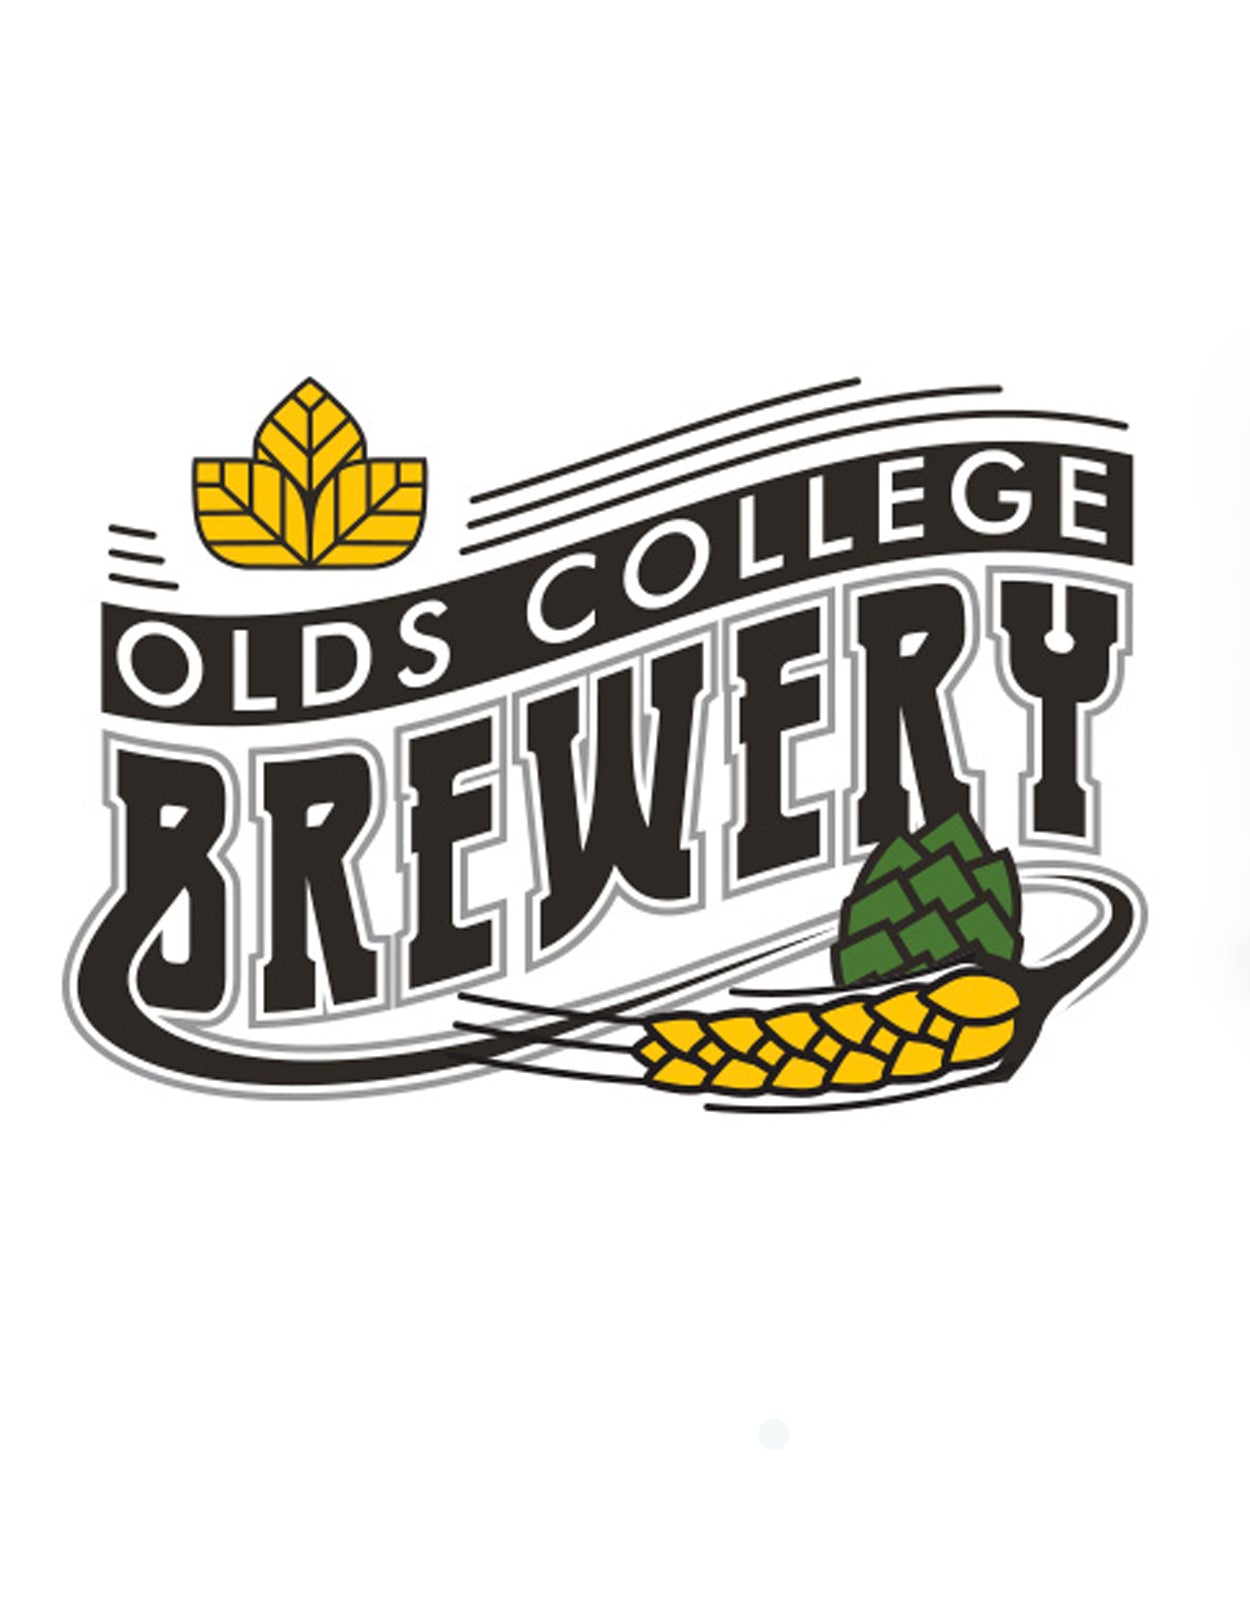 Olds College Brewery Beer School Extra Pale Ale 473 ml - 4 Cans